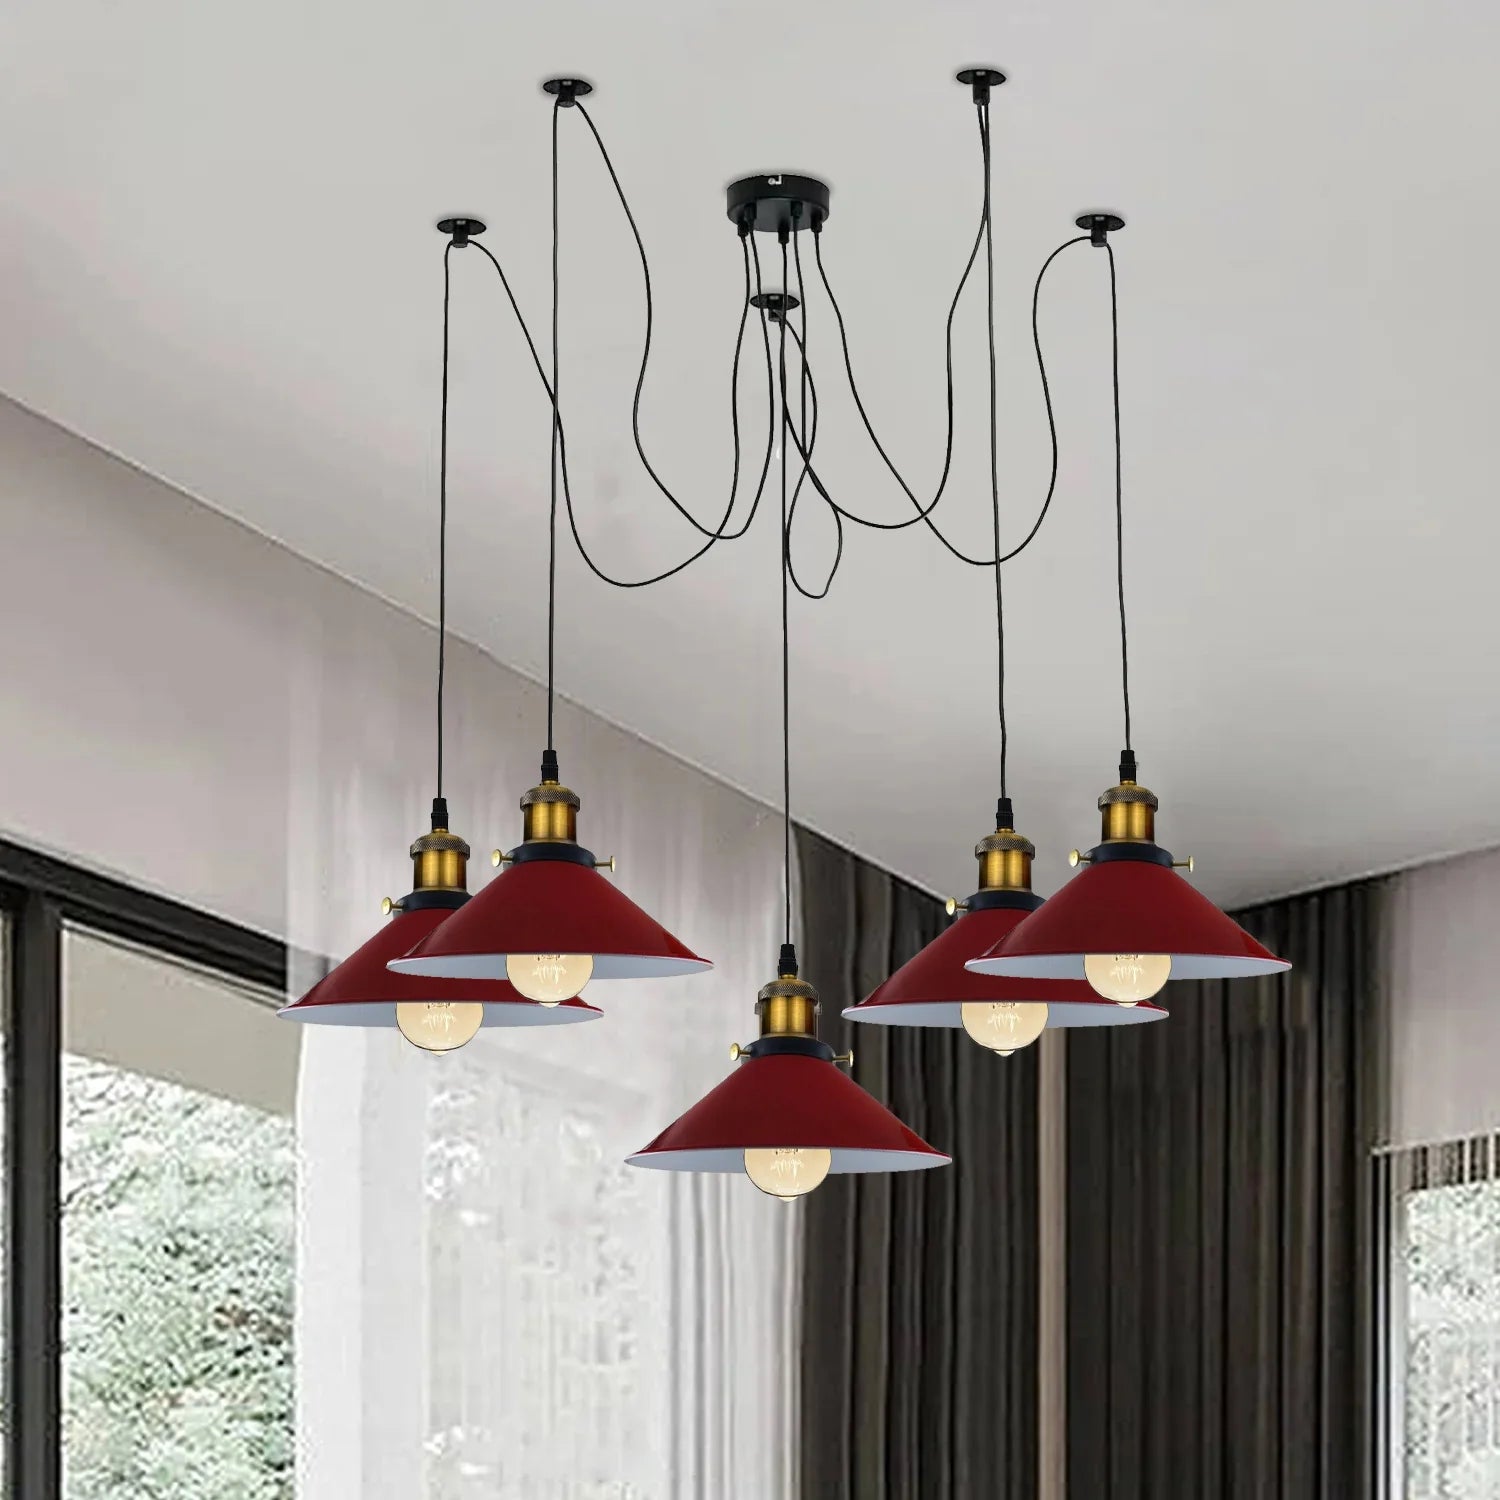 5-Head Cone Shape Spider Pendant Light in Red